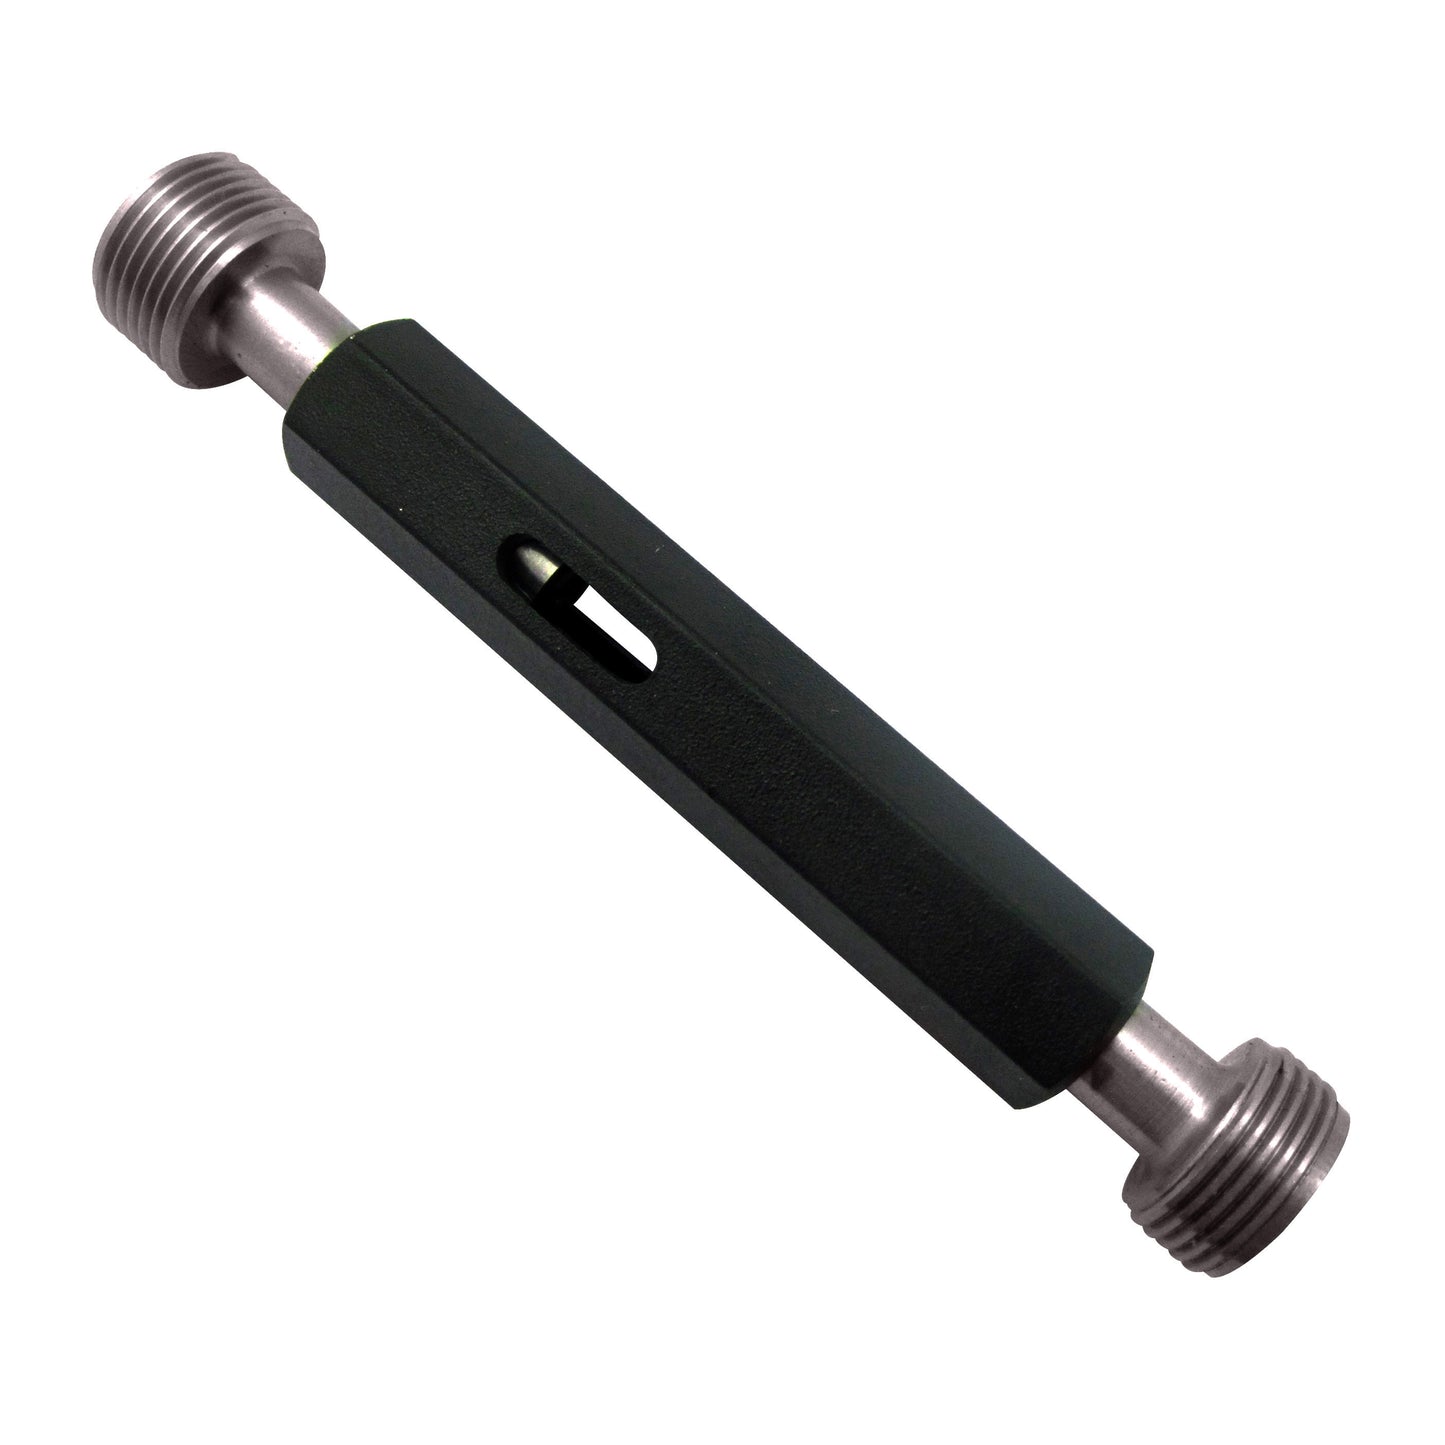 3/4" - 27 Unified Right Hand Thread Plug Gauge